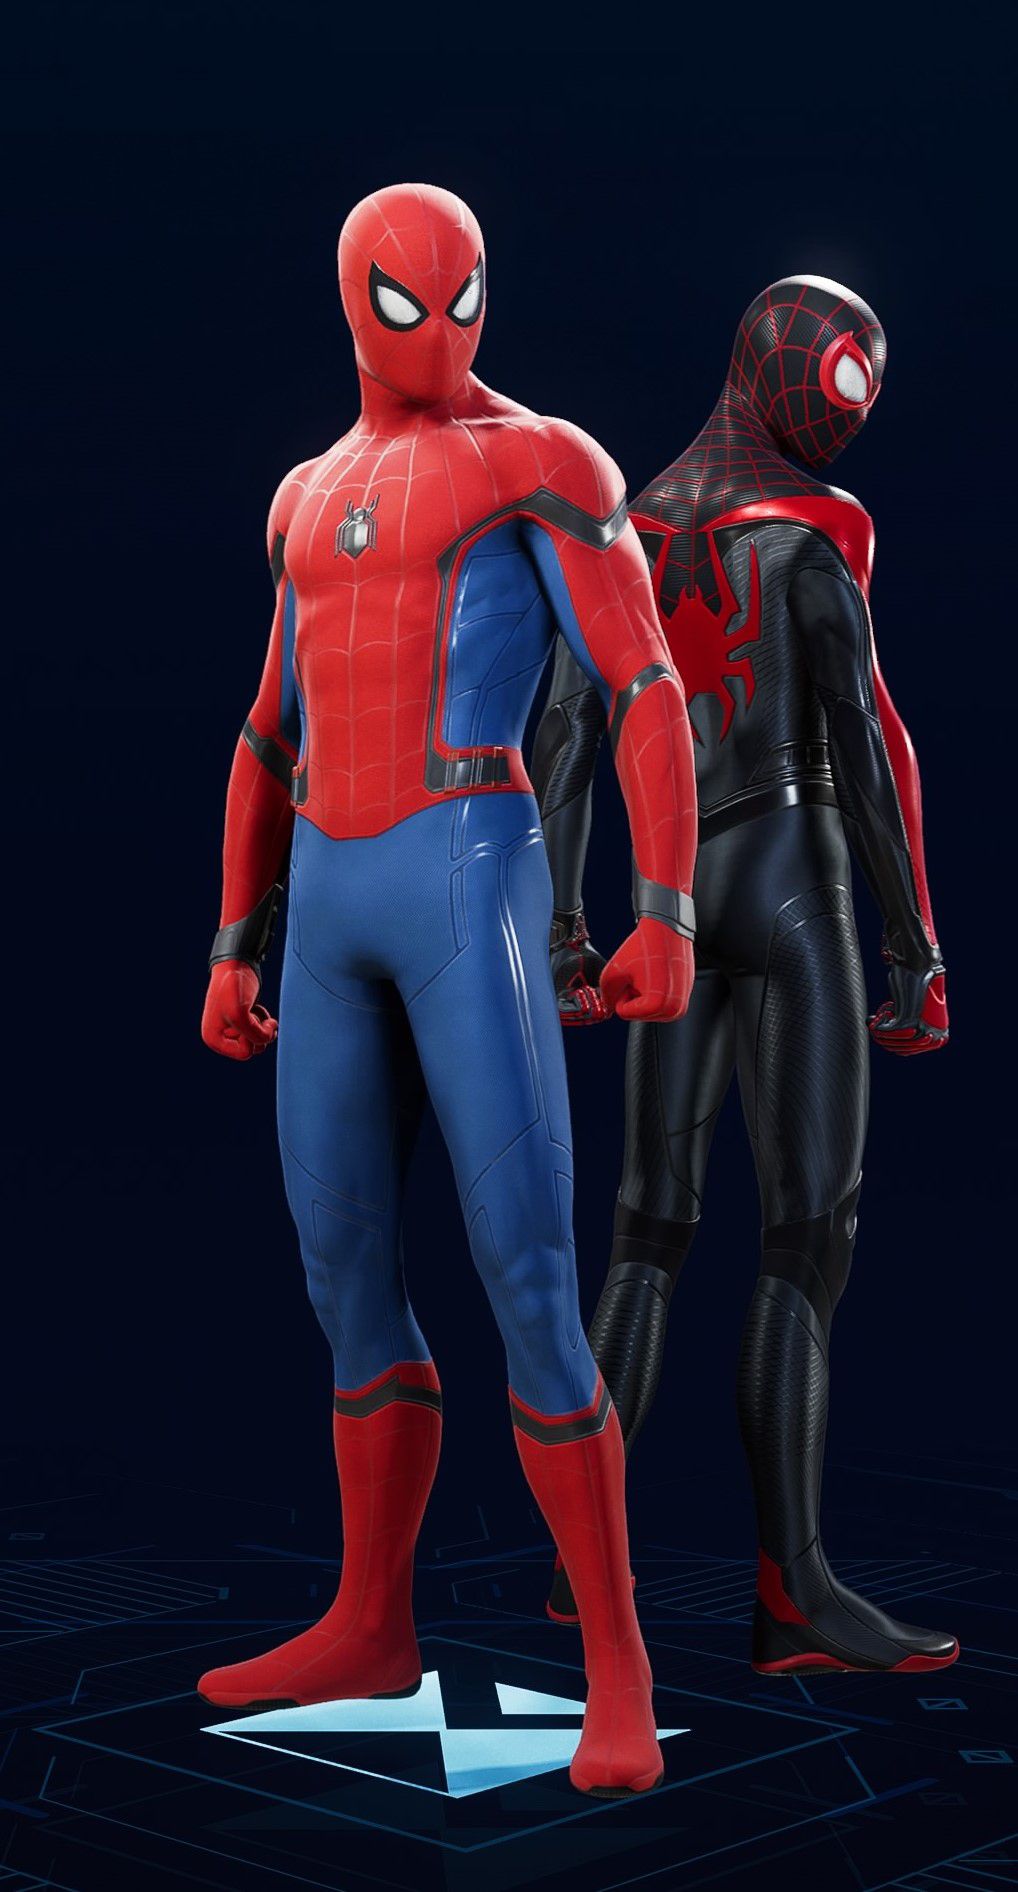 Peter Parker stands in his Upgraded Classic Suit in the suit selection screen of Spider-Man 2.